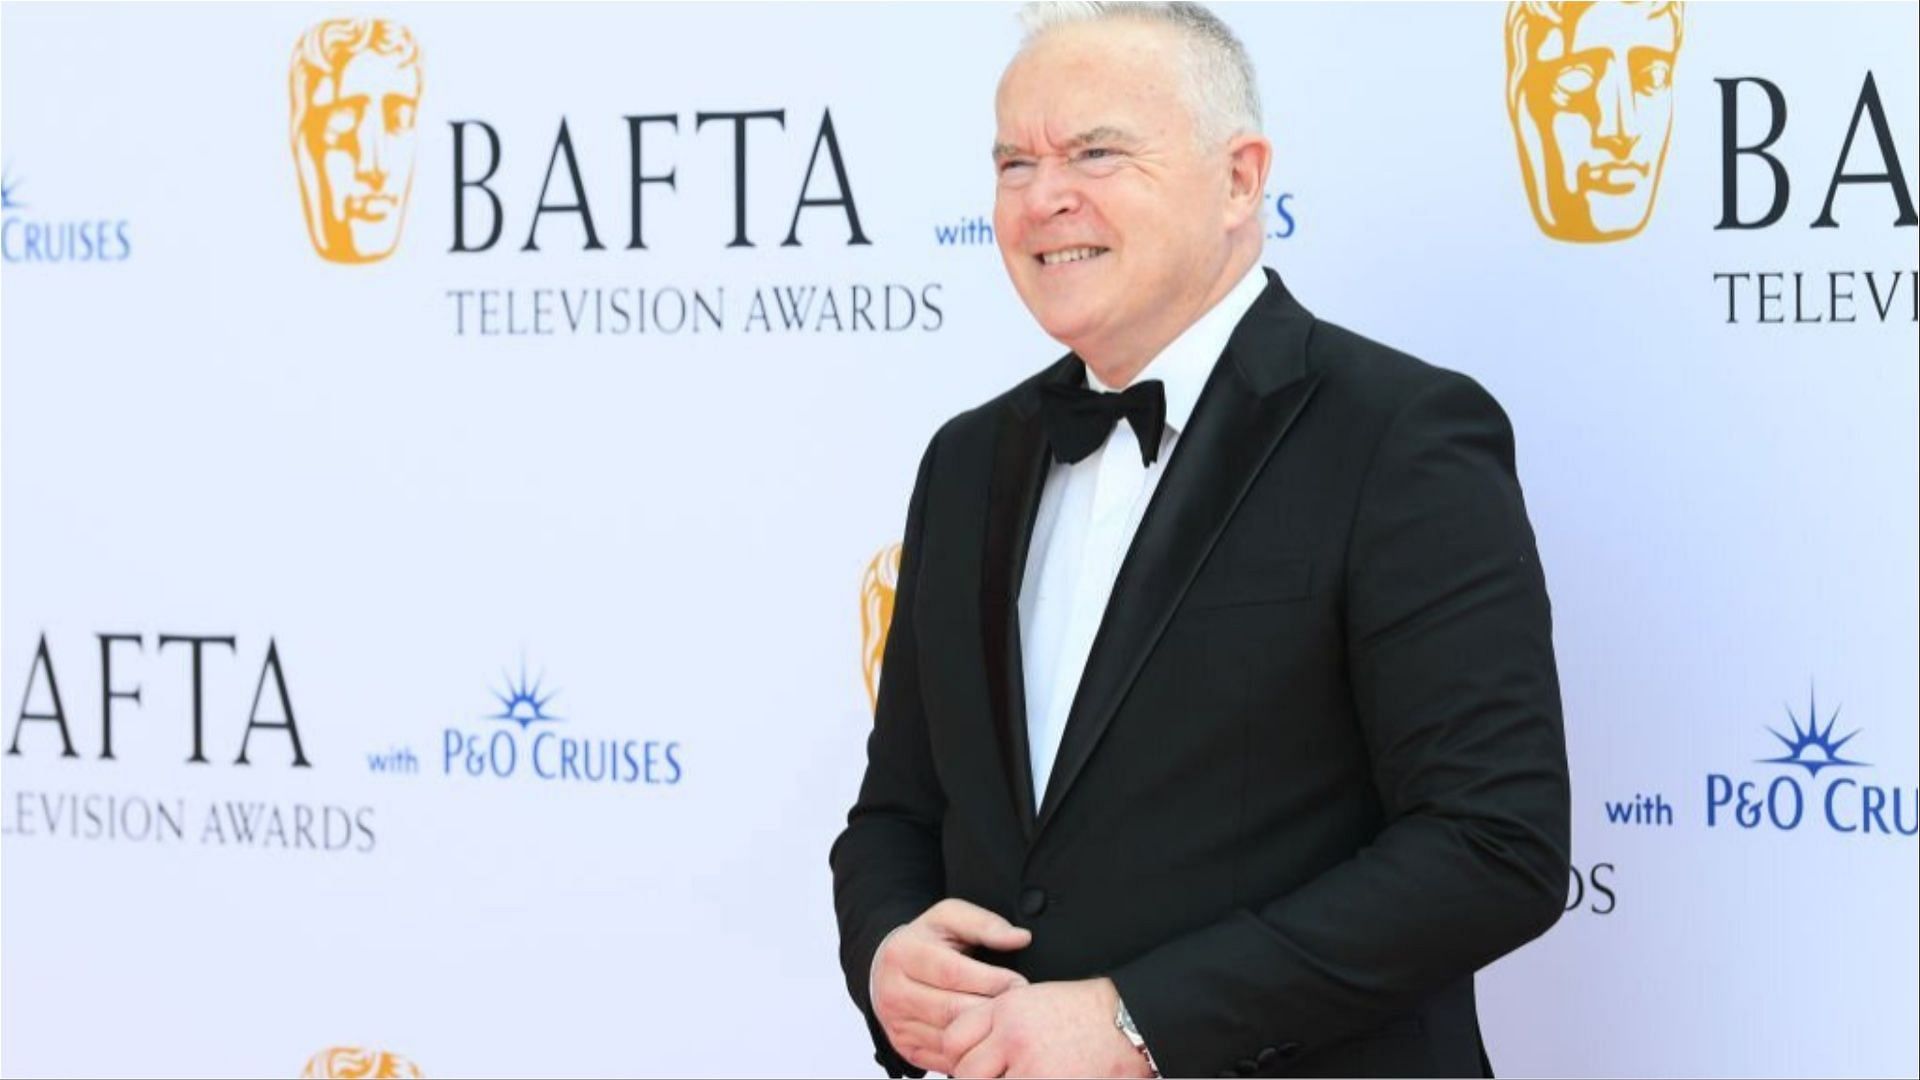 Huw Edwards has been named a BBC star by his wife in a statement (Image via Joe Maher/Getty Images)